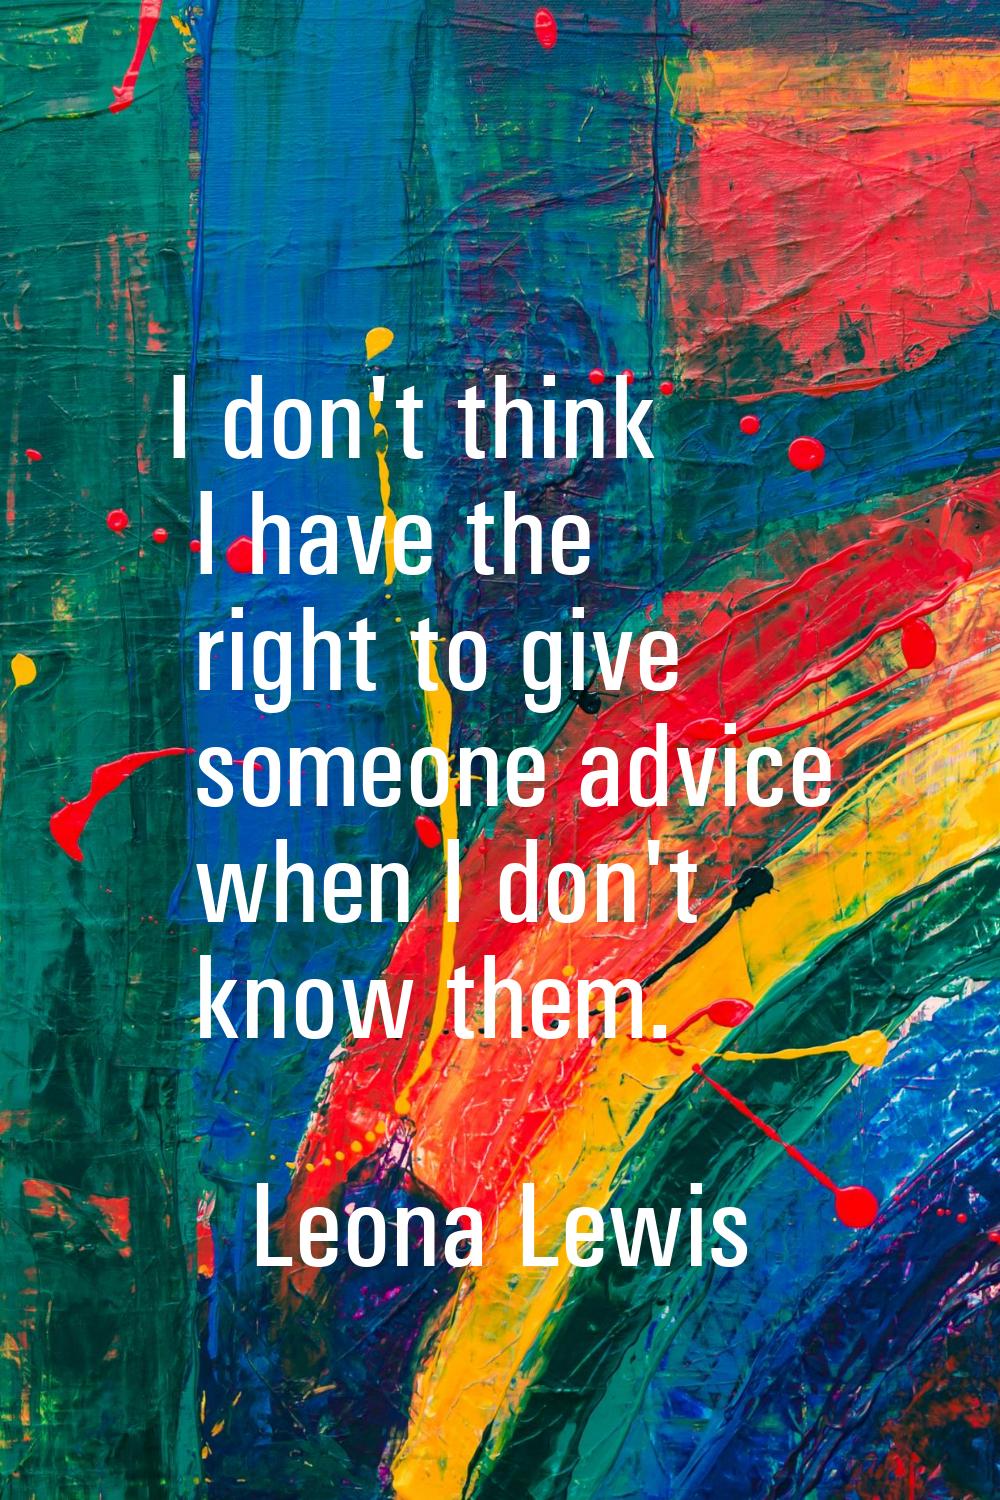 I don't think I have the right to give someone advice when I don't know them.